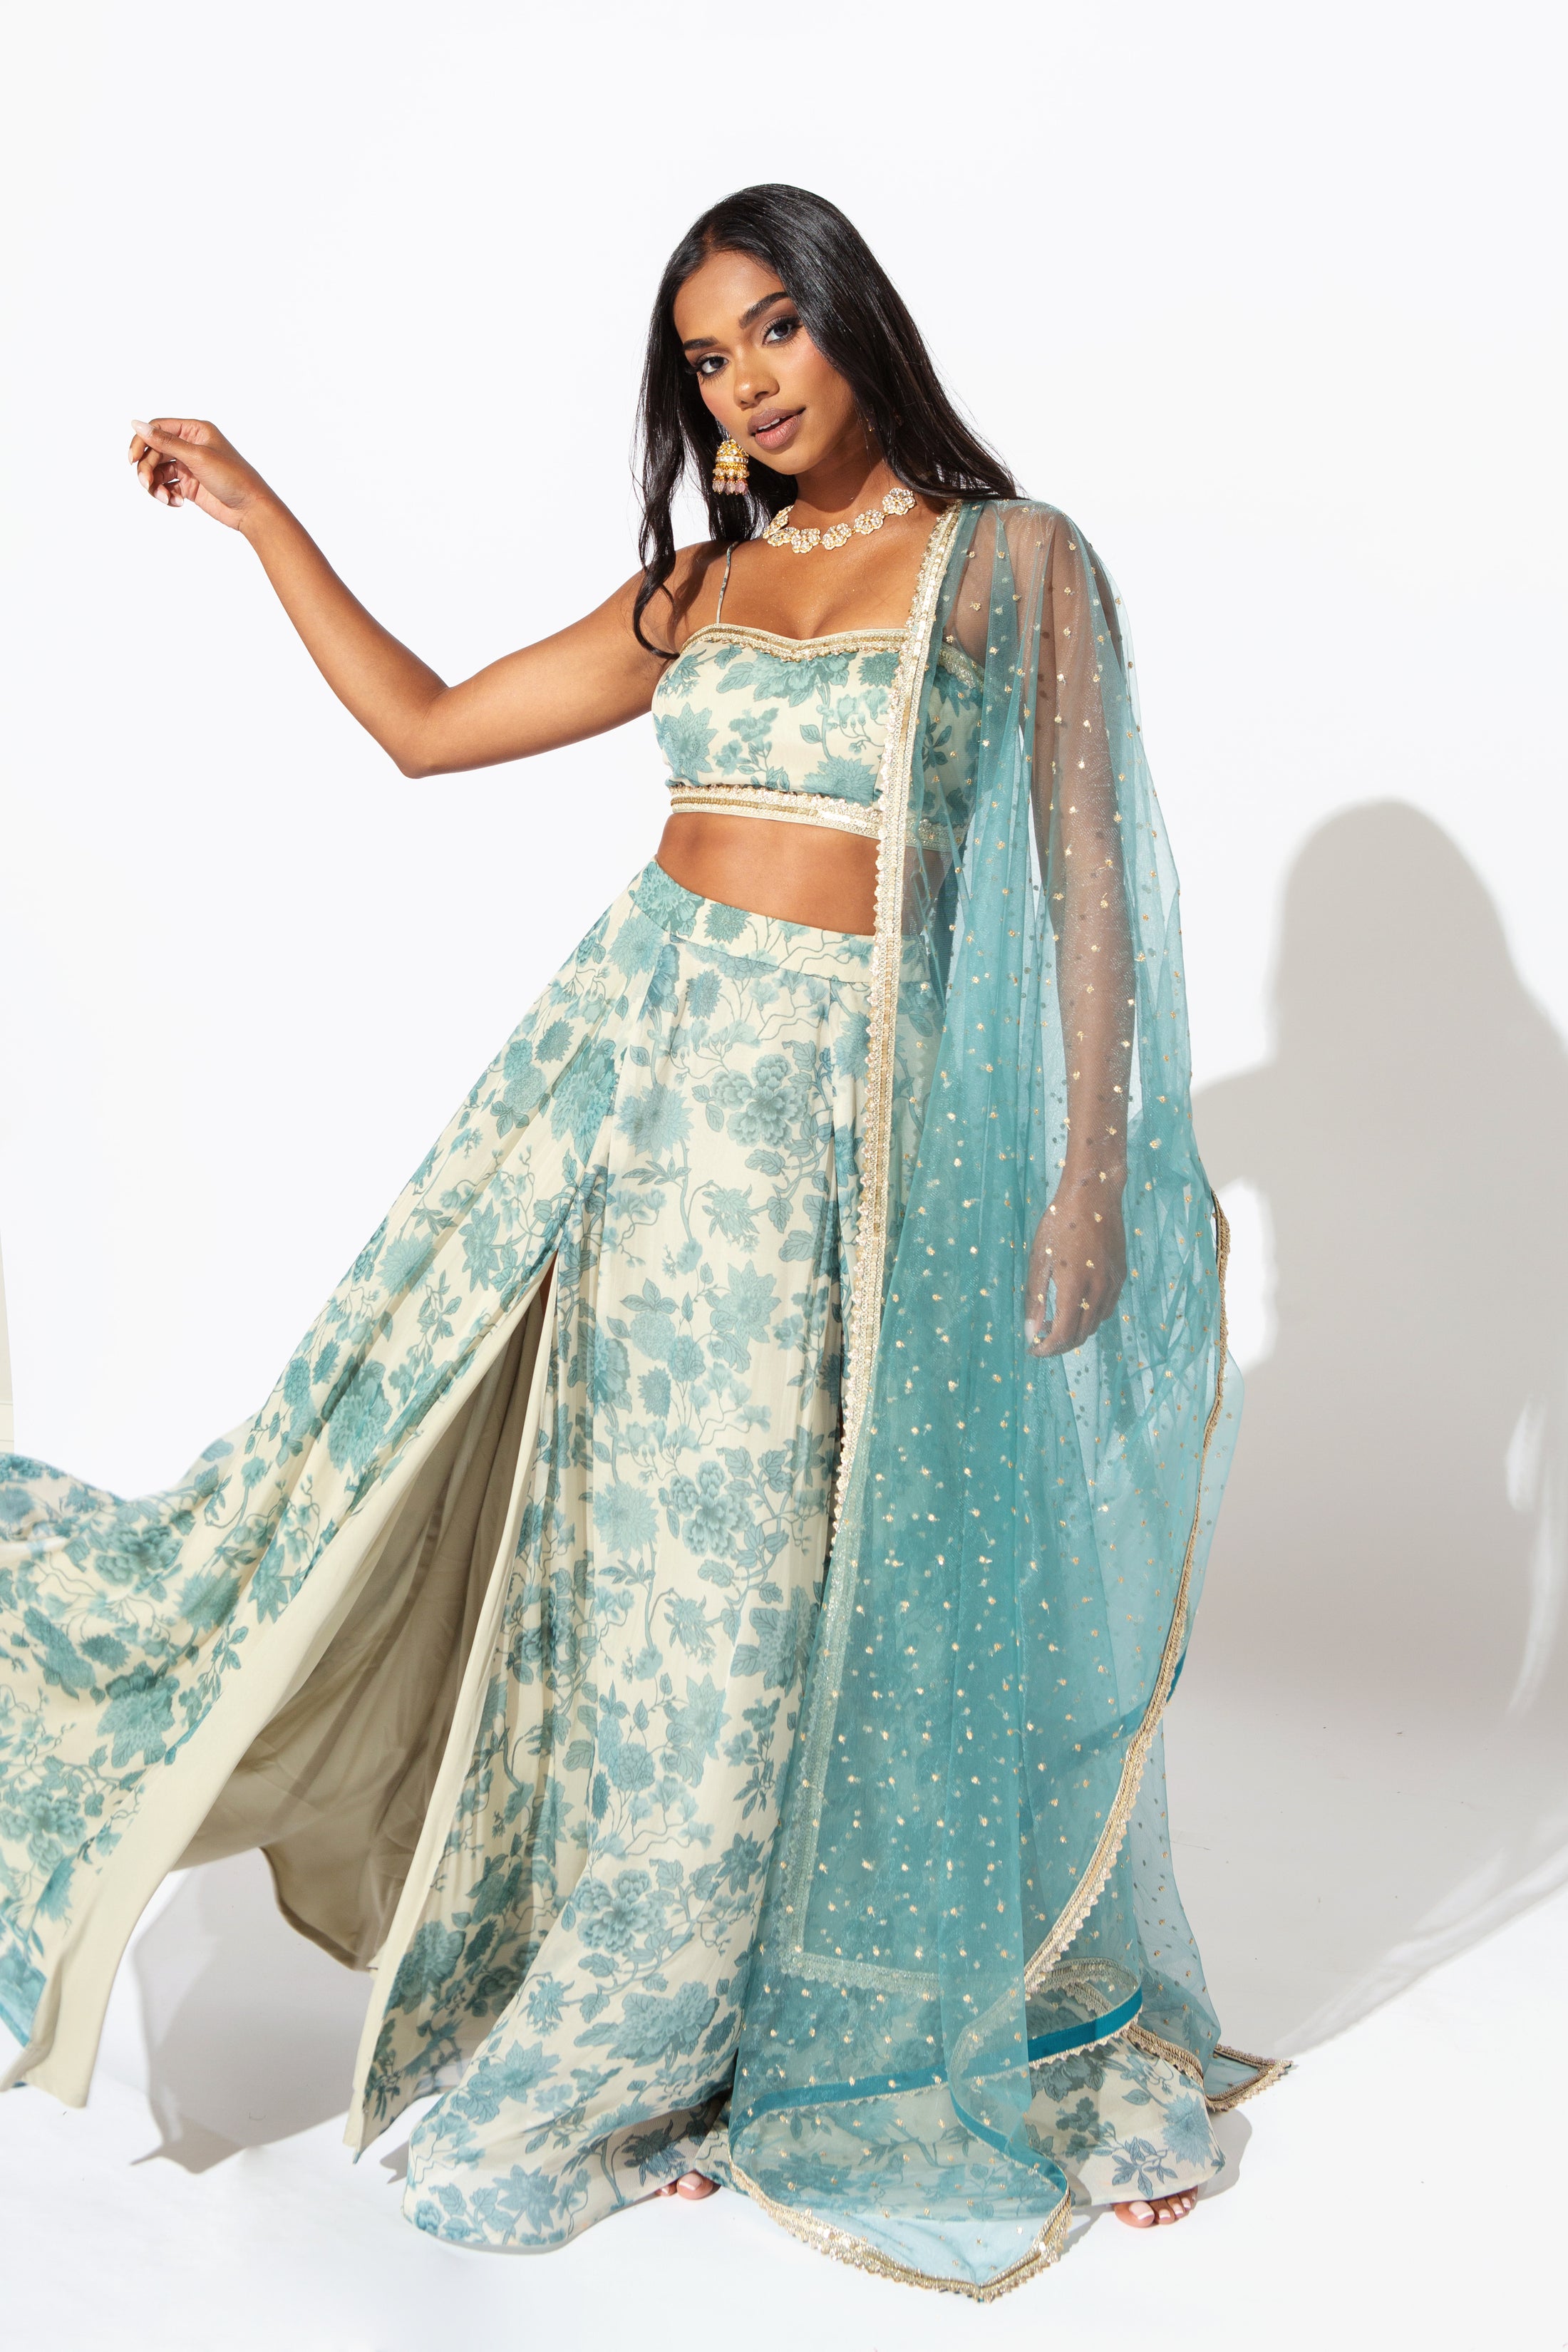 OUT OF THE BLUE DUPATTA